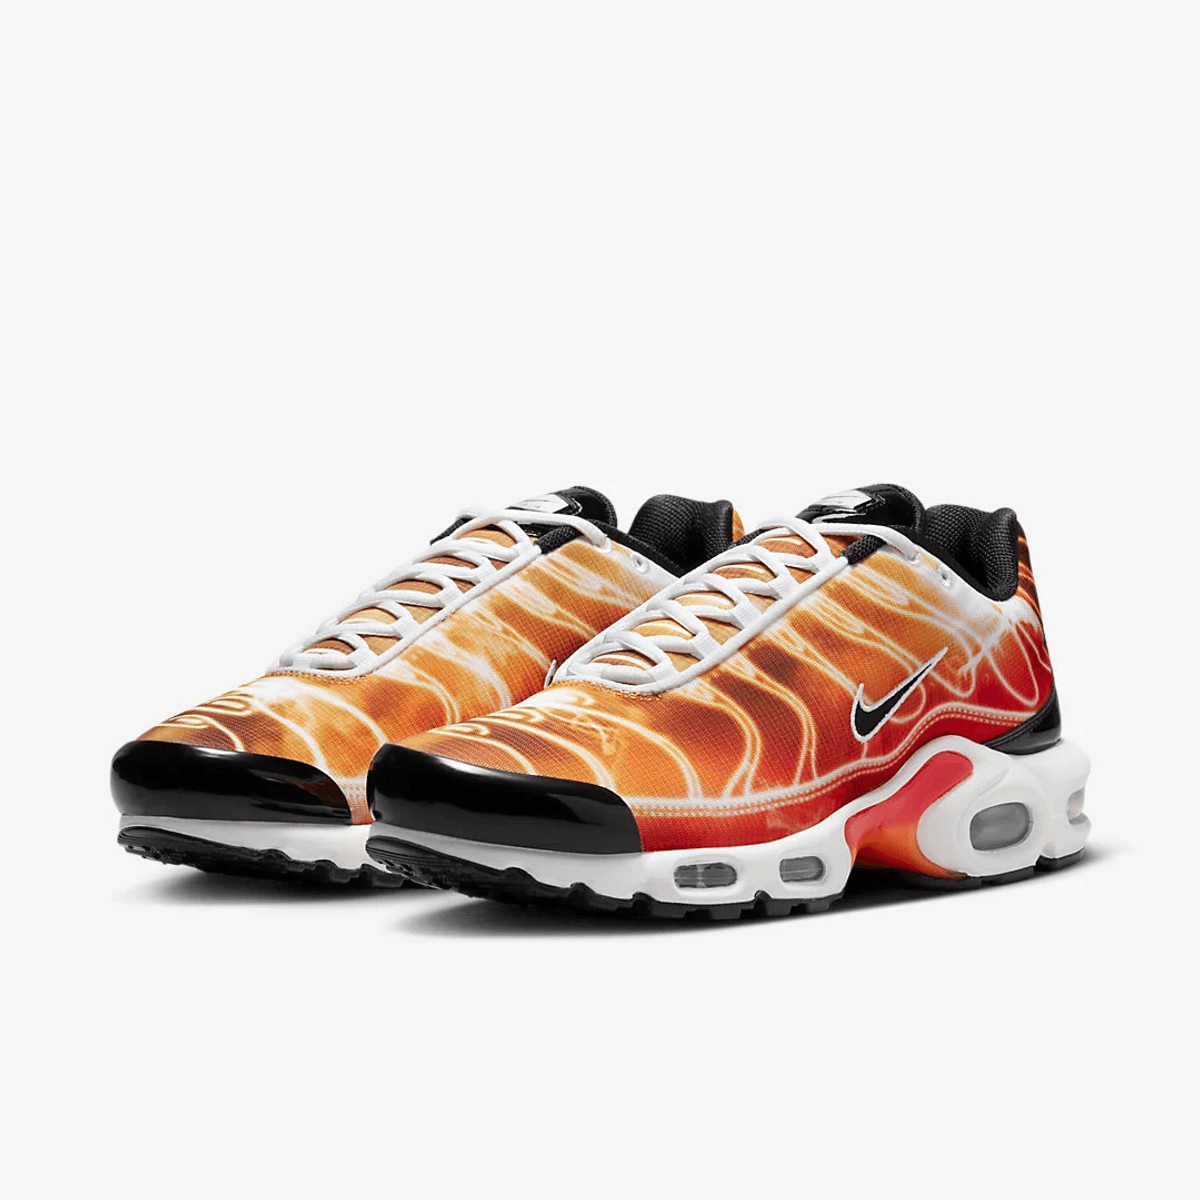 The Nike Air Max Plus Light Photography Is Picture Perfect